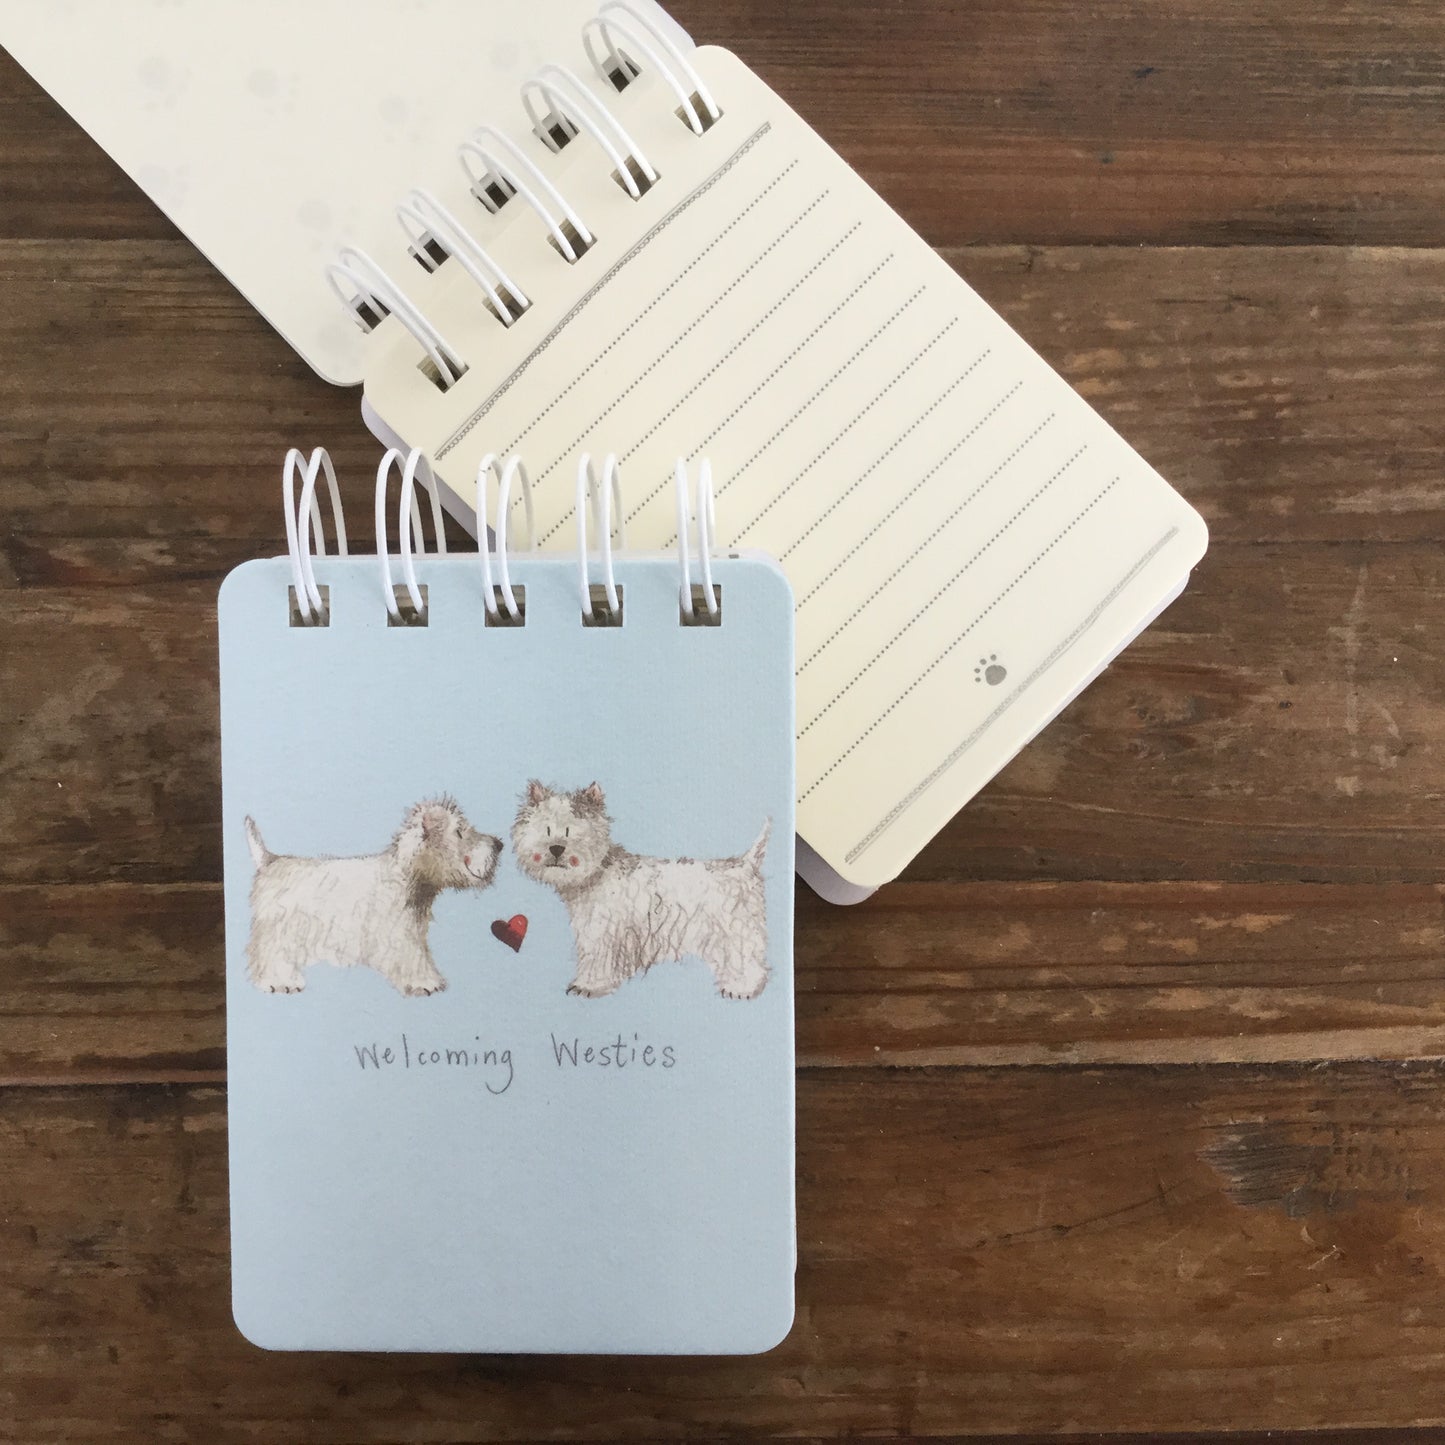 Welcoming Westies Dog Small Spiral Bound Notepad